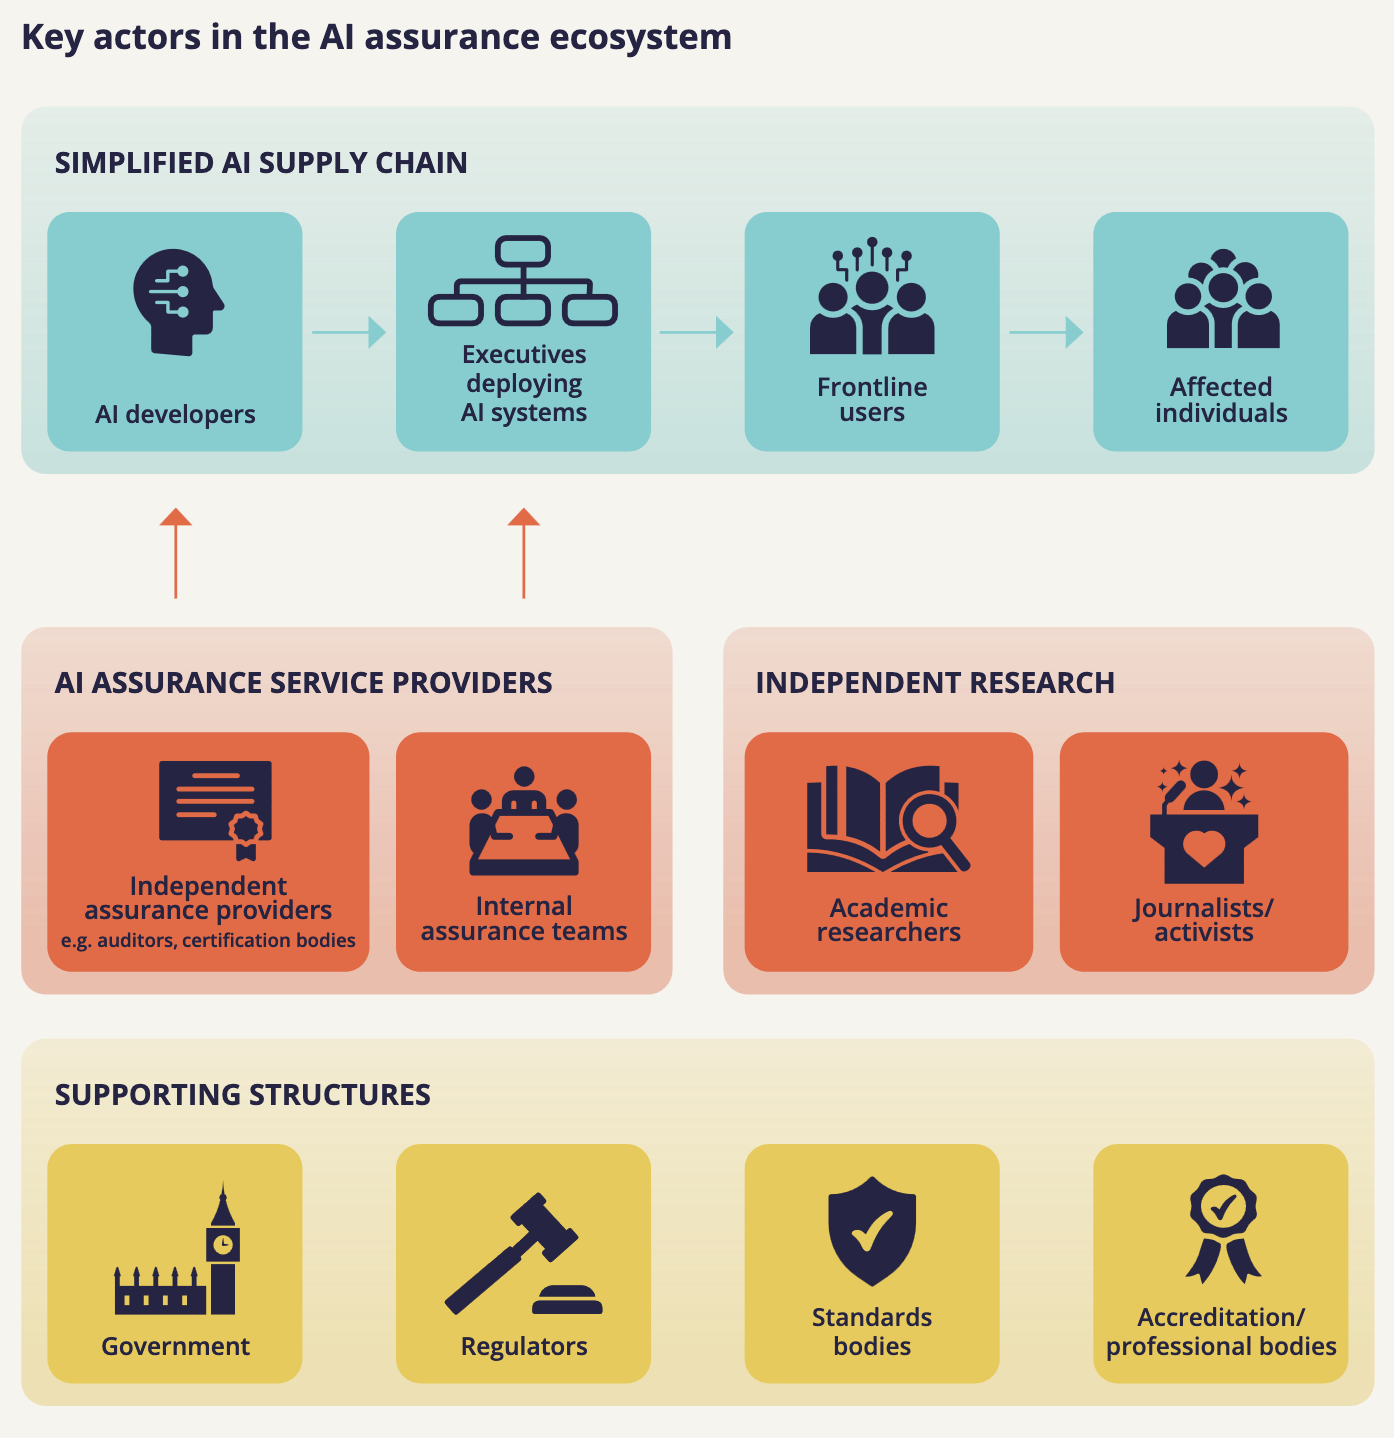 This diagram depicts the AI assurance ecosystem, illustrating interactions between AI supply chain participants, AI Assurance Service Providers, Independent Researchers, and Supporting Structures like regulators and standards bodies.